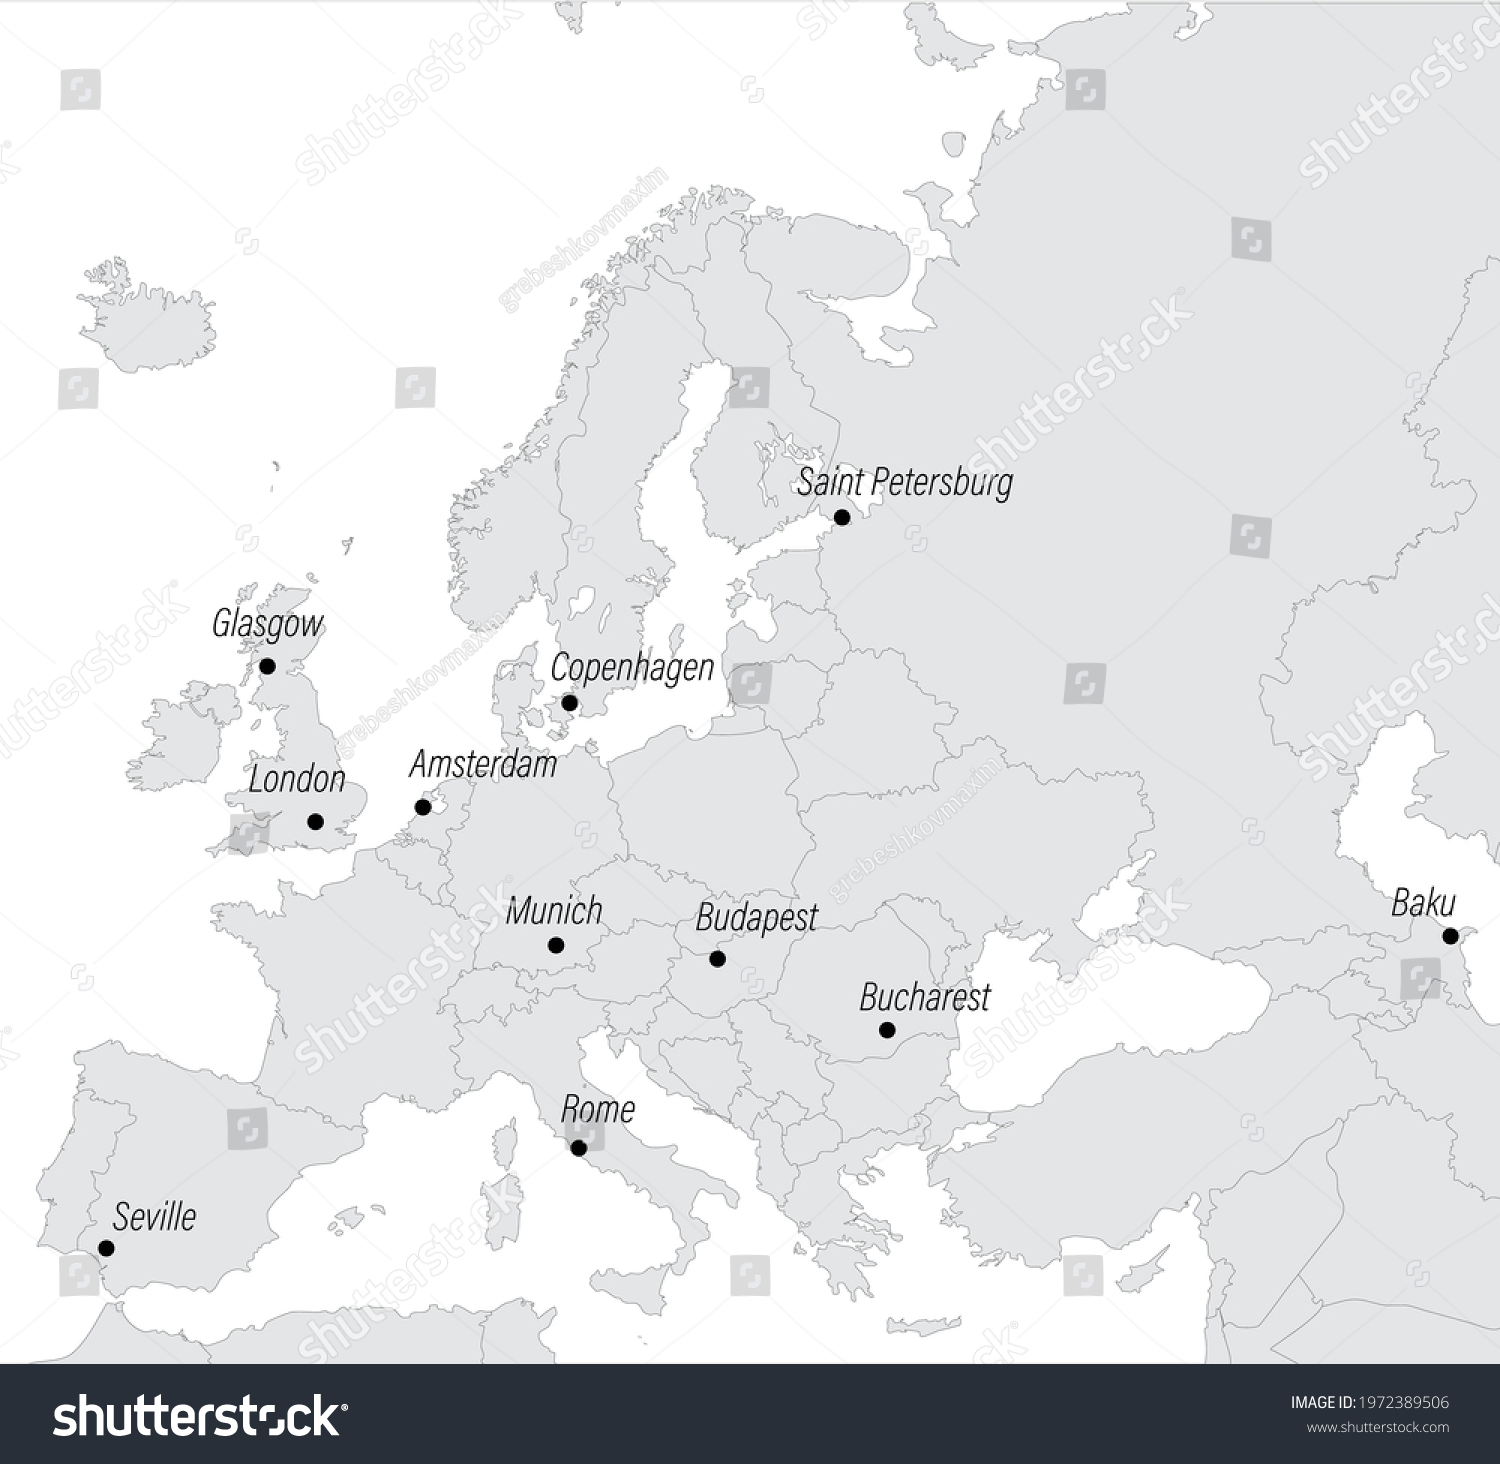 SVG of Map of Europe with European tournament host cities. Vector illustration svg